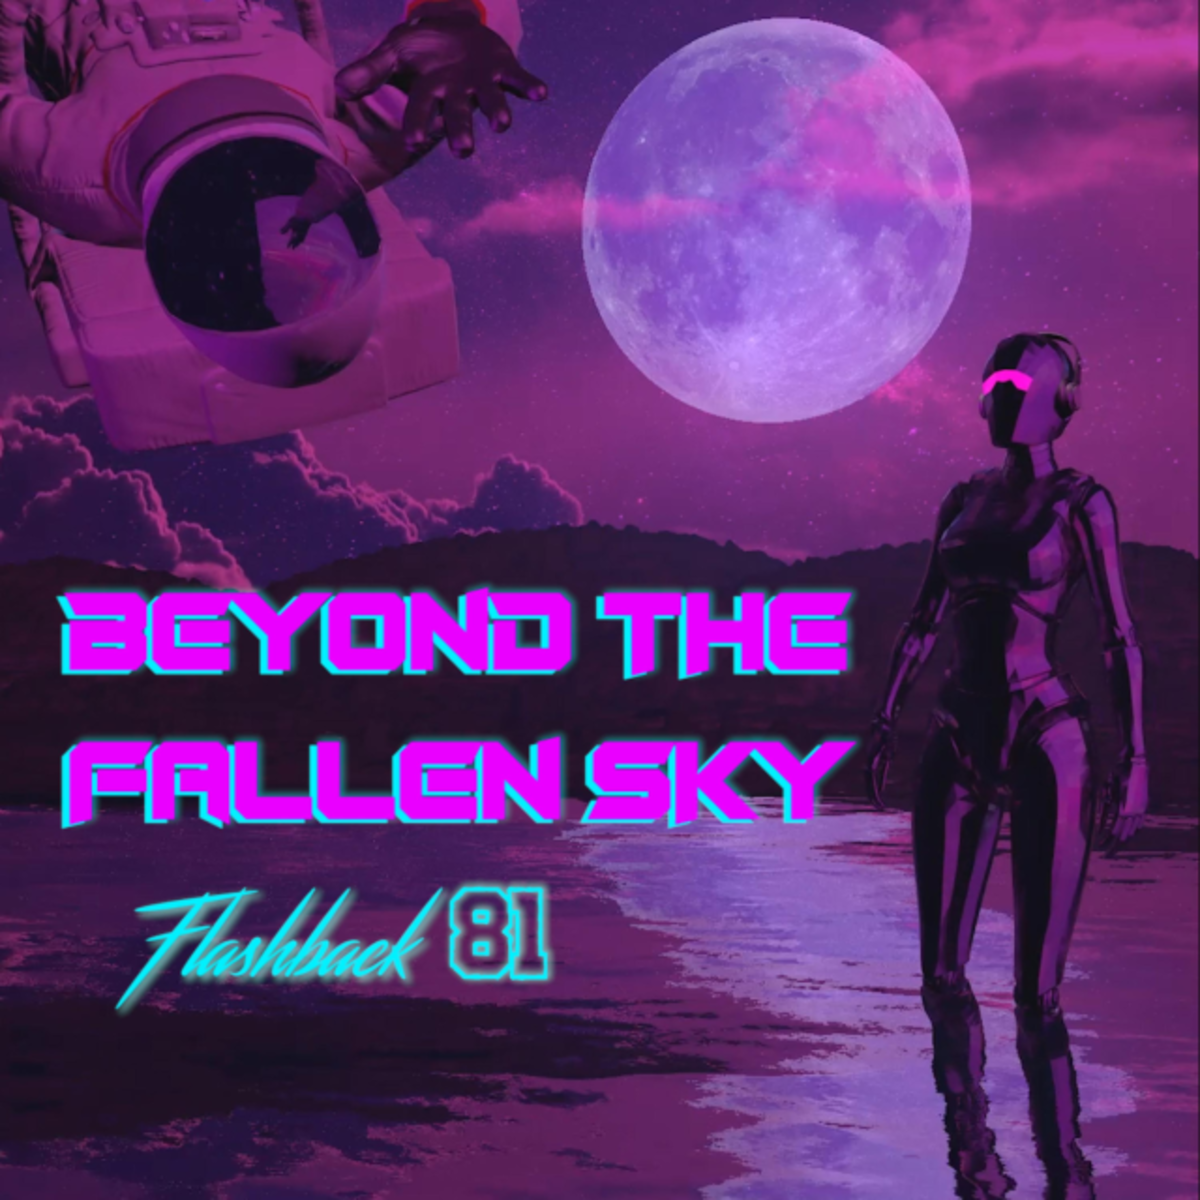 synth-album-review-beyond-the-fallen-sky-by-flashback81